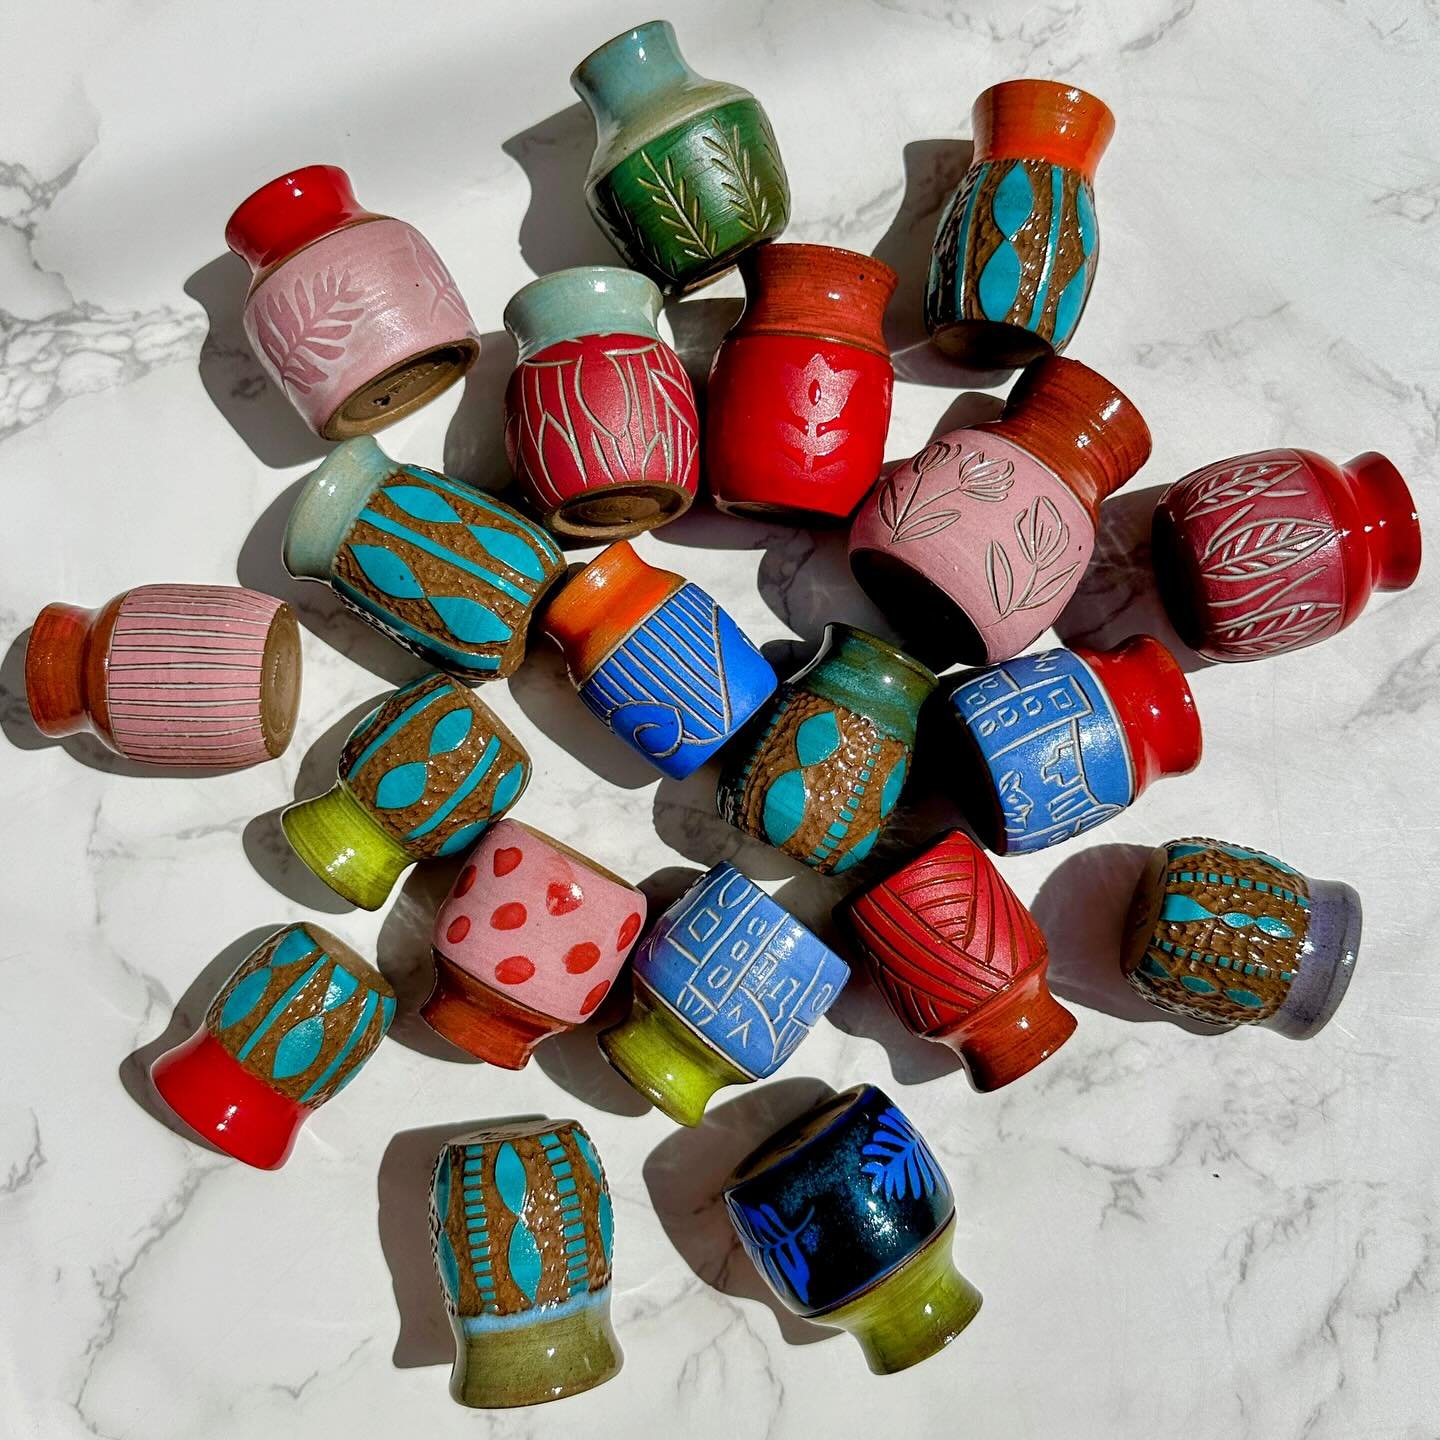 Itty bitty colorful wheel-thrown and hand-carved vases! Aren&rsquo;t they just adorable? Can I part with them? Can I??? 🤪 

Get them first next weekend at Melrose Arts Festival! Want one shipped to you? DM me! $20 + shipping. 

#pottery #tinypottery